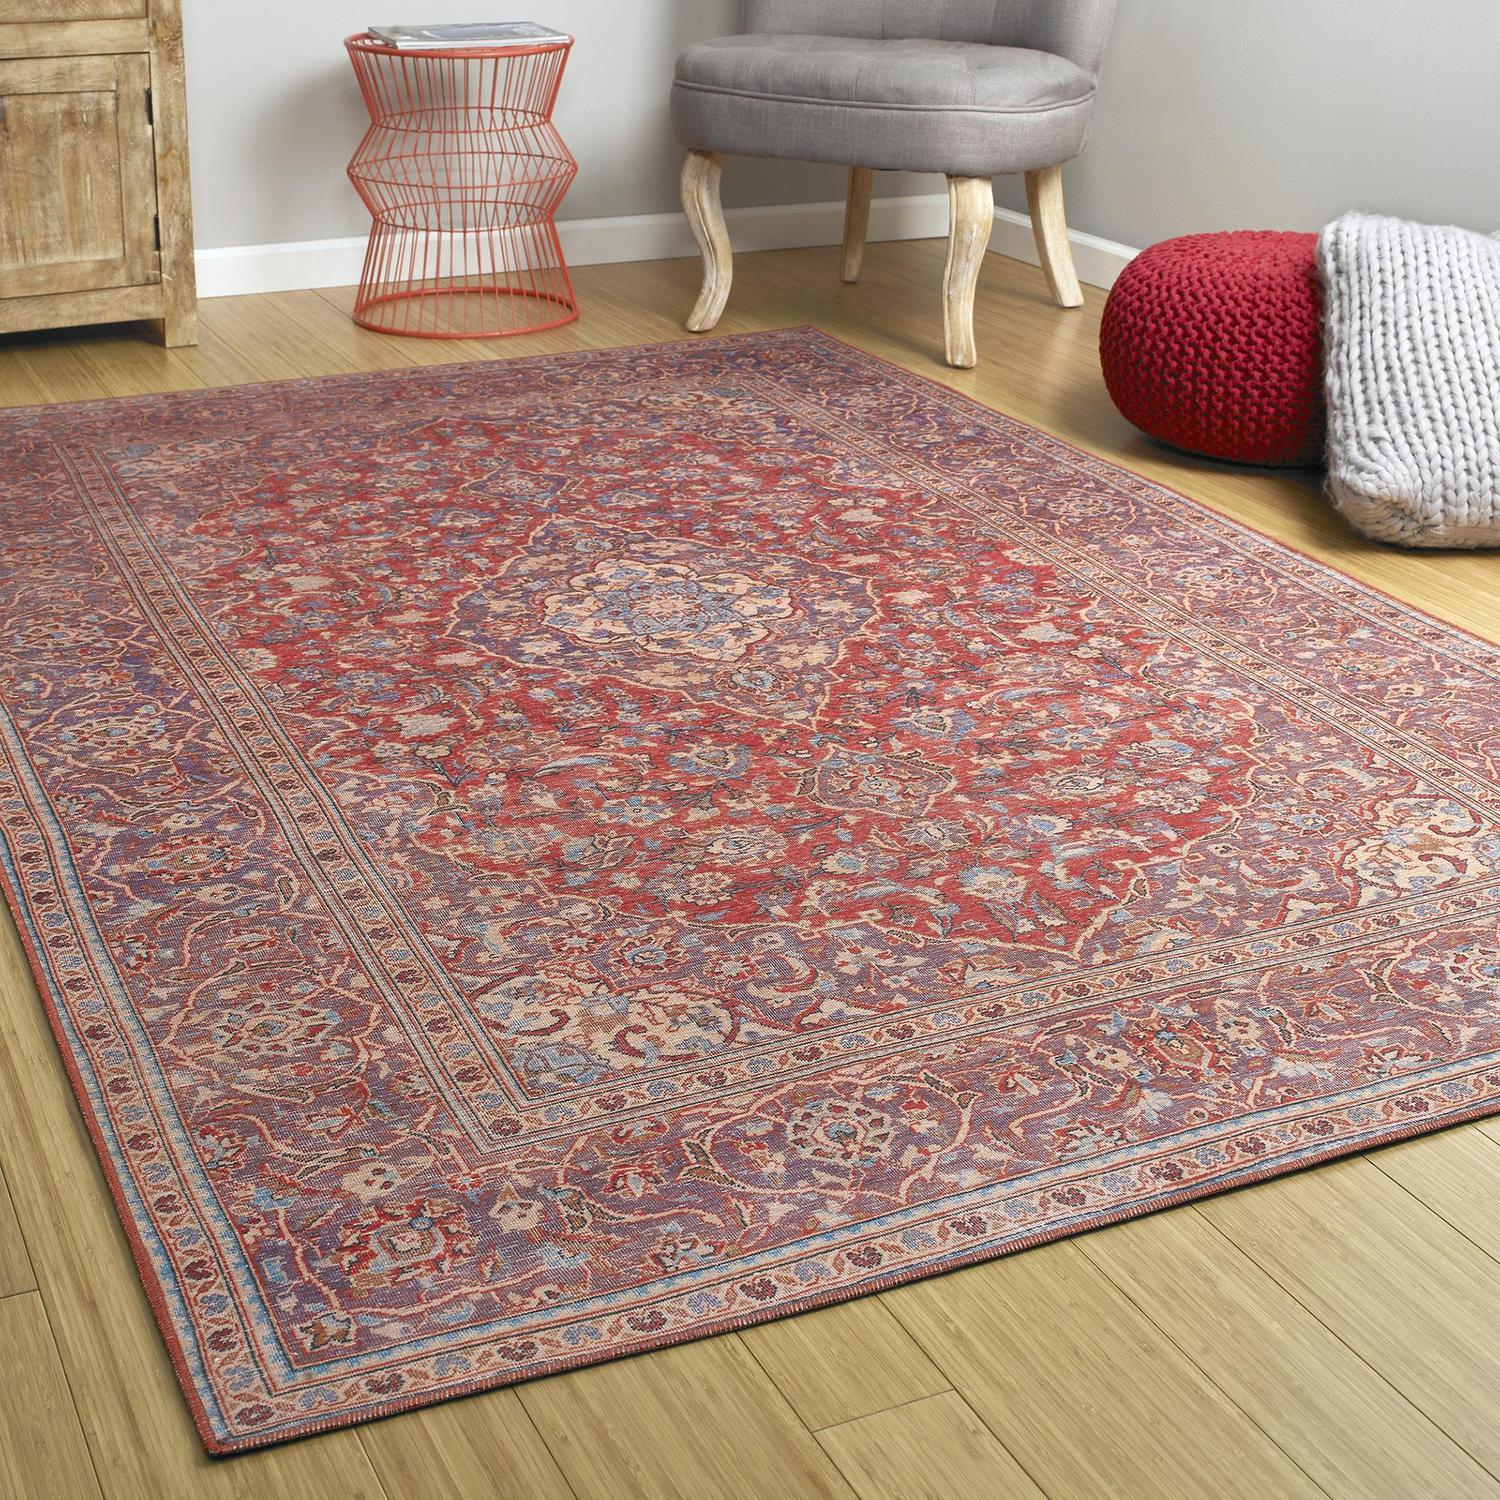 Kaleen Boho Patio BOH03-99 Rug in Coral - (2 Foot 3 Inch x 7 Foot 6 Inch) - image 4 of 5